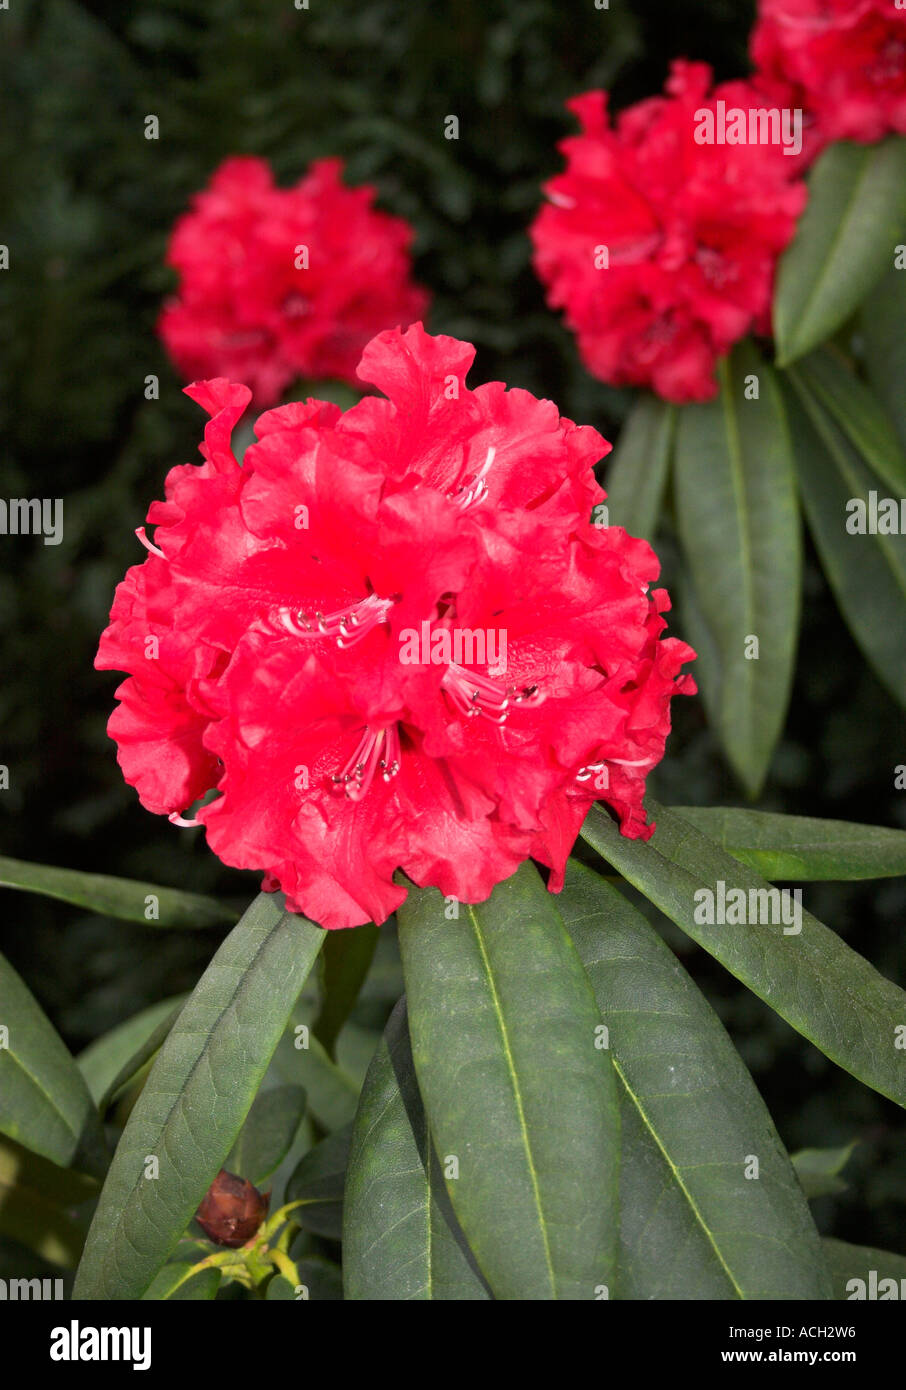 Red Rhododendron Bush Stock Photo